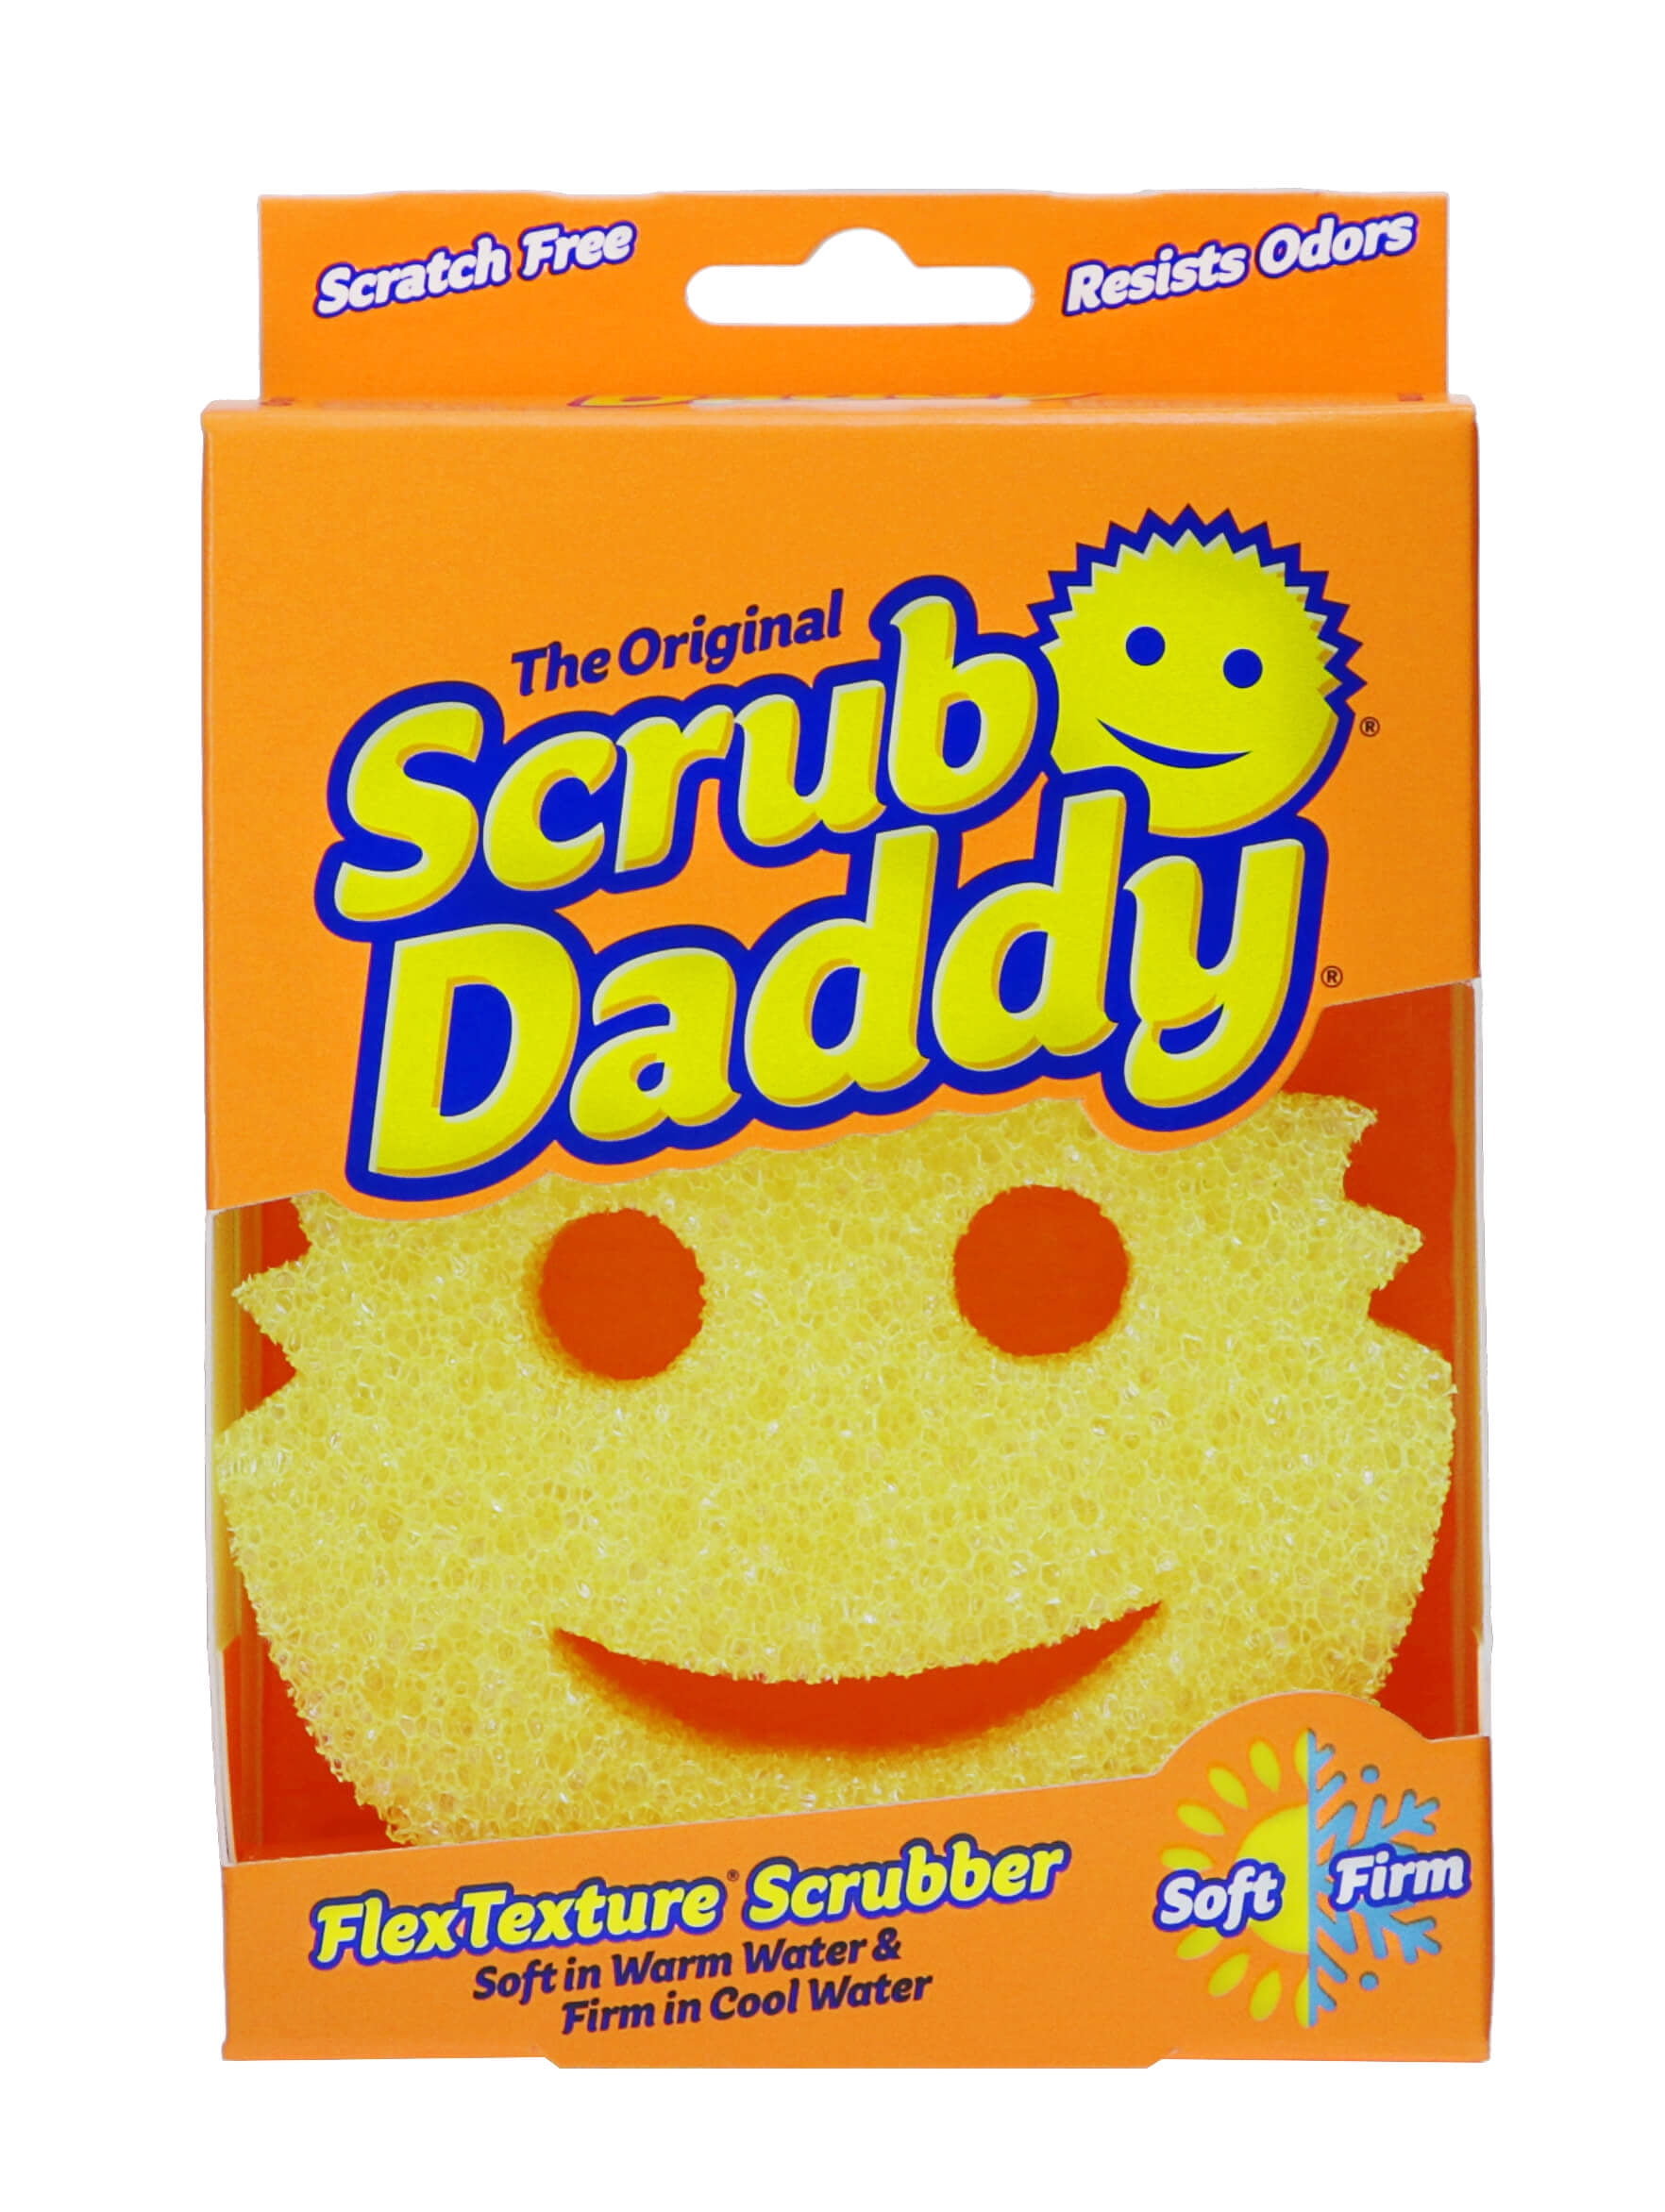 Scrub Daddy Scratch-Free Dish Sponge - BPA Free & Made with Flextexture - Stain, Mold & Odor Resistant